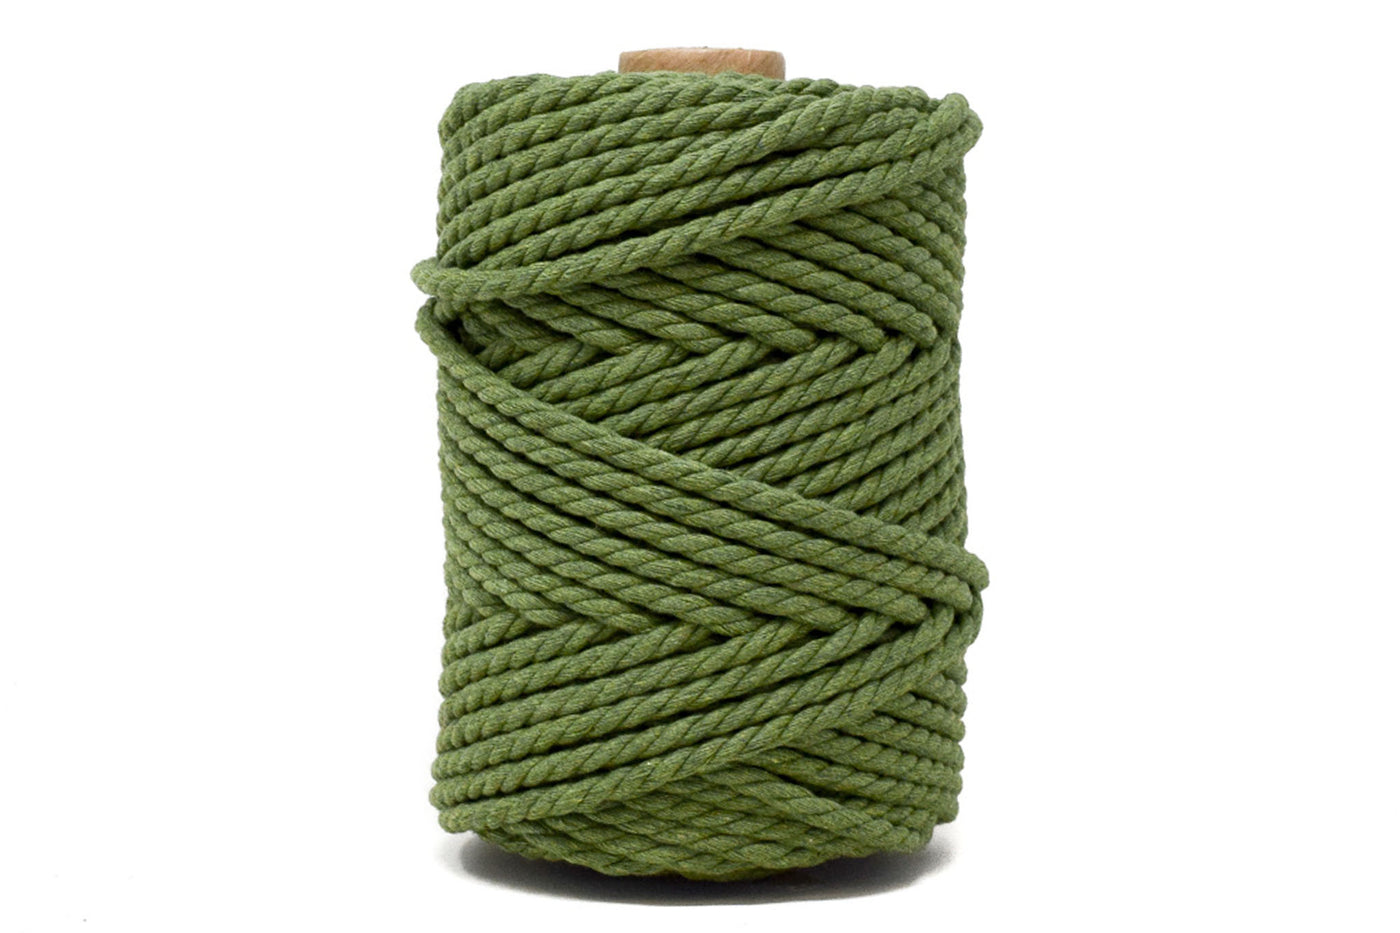 COTTON ROPE ZERO WASTE 5 MM - 3 PLY - GREENERY COLOR